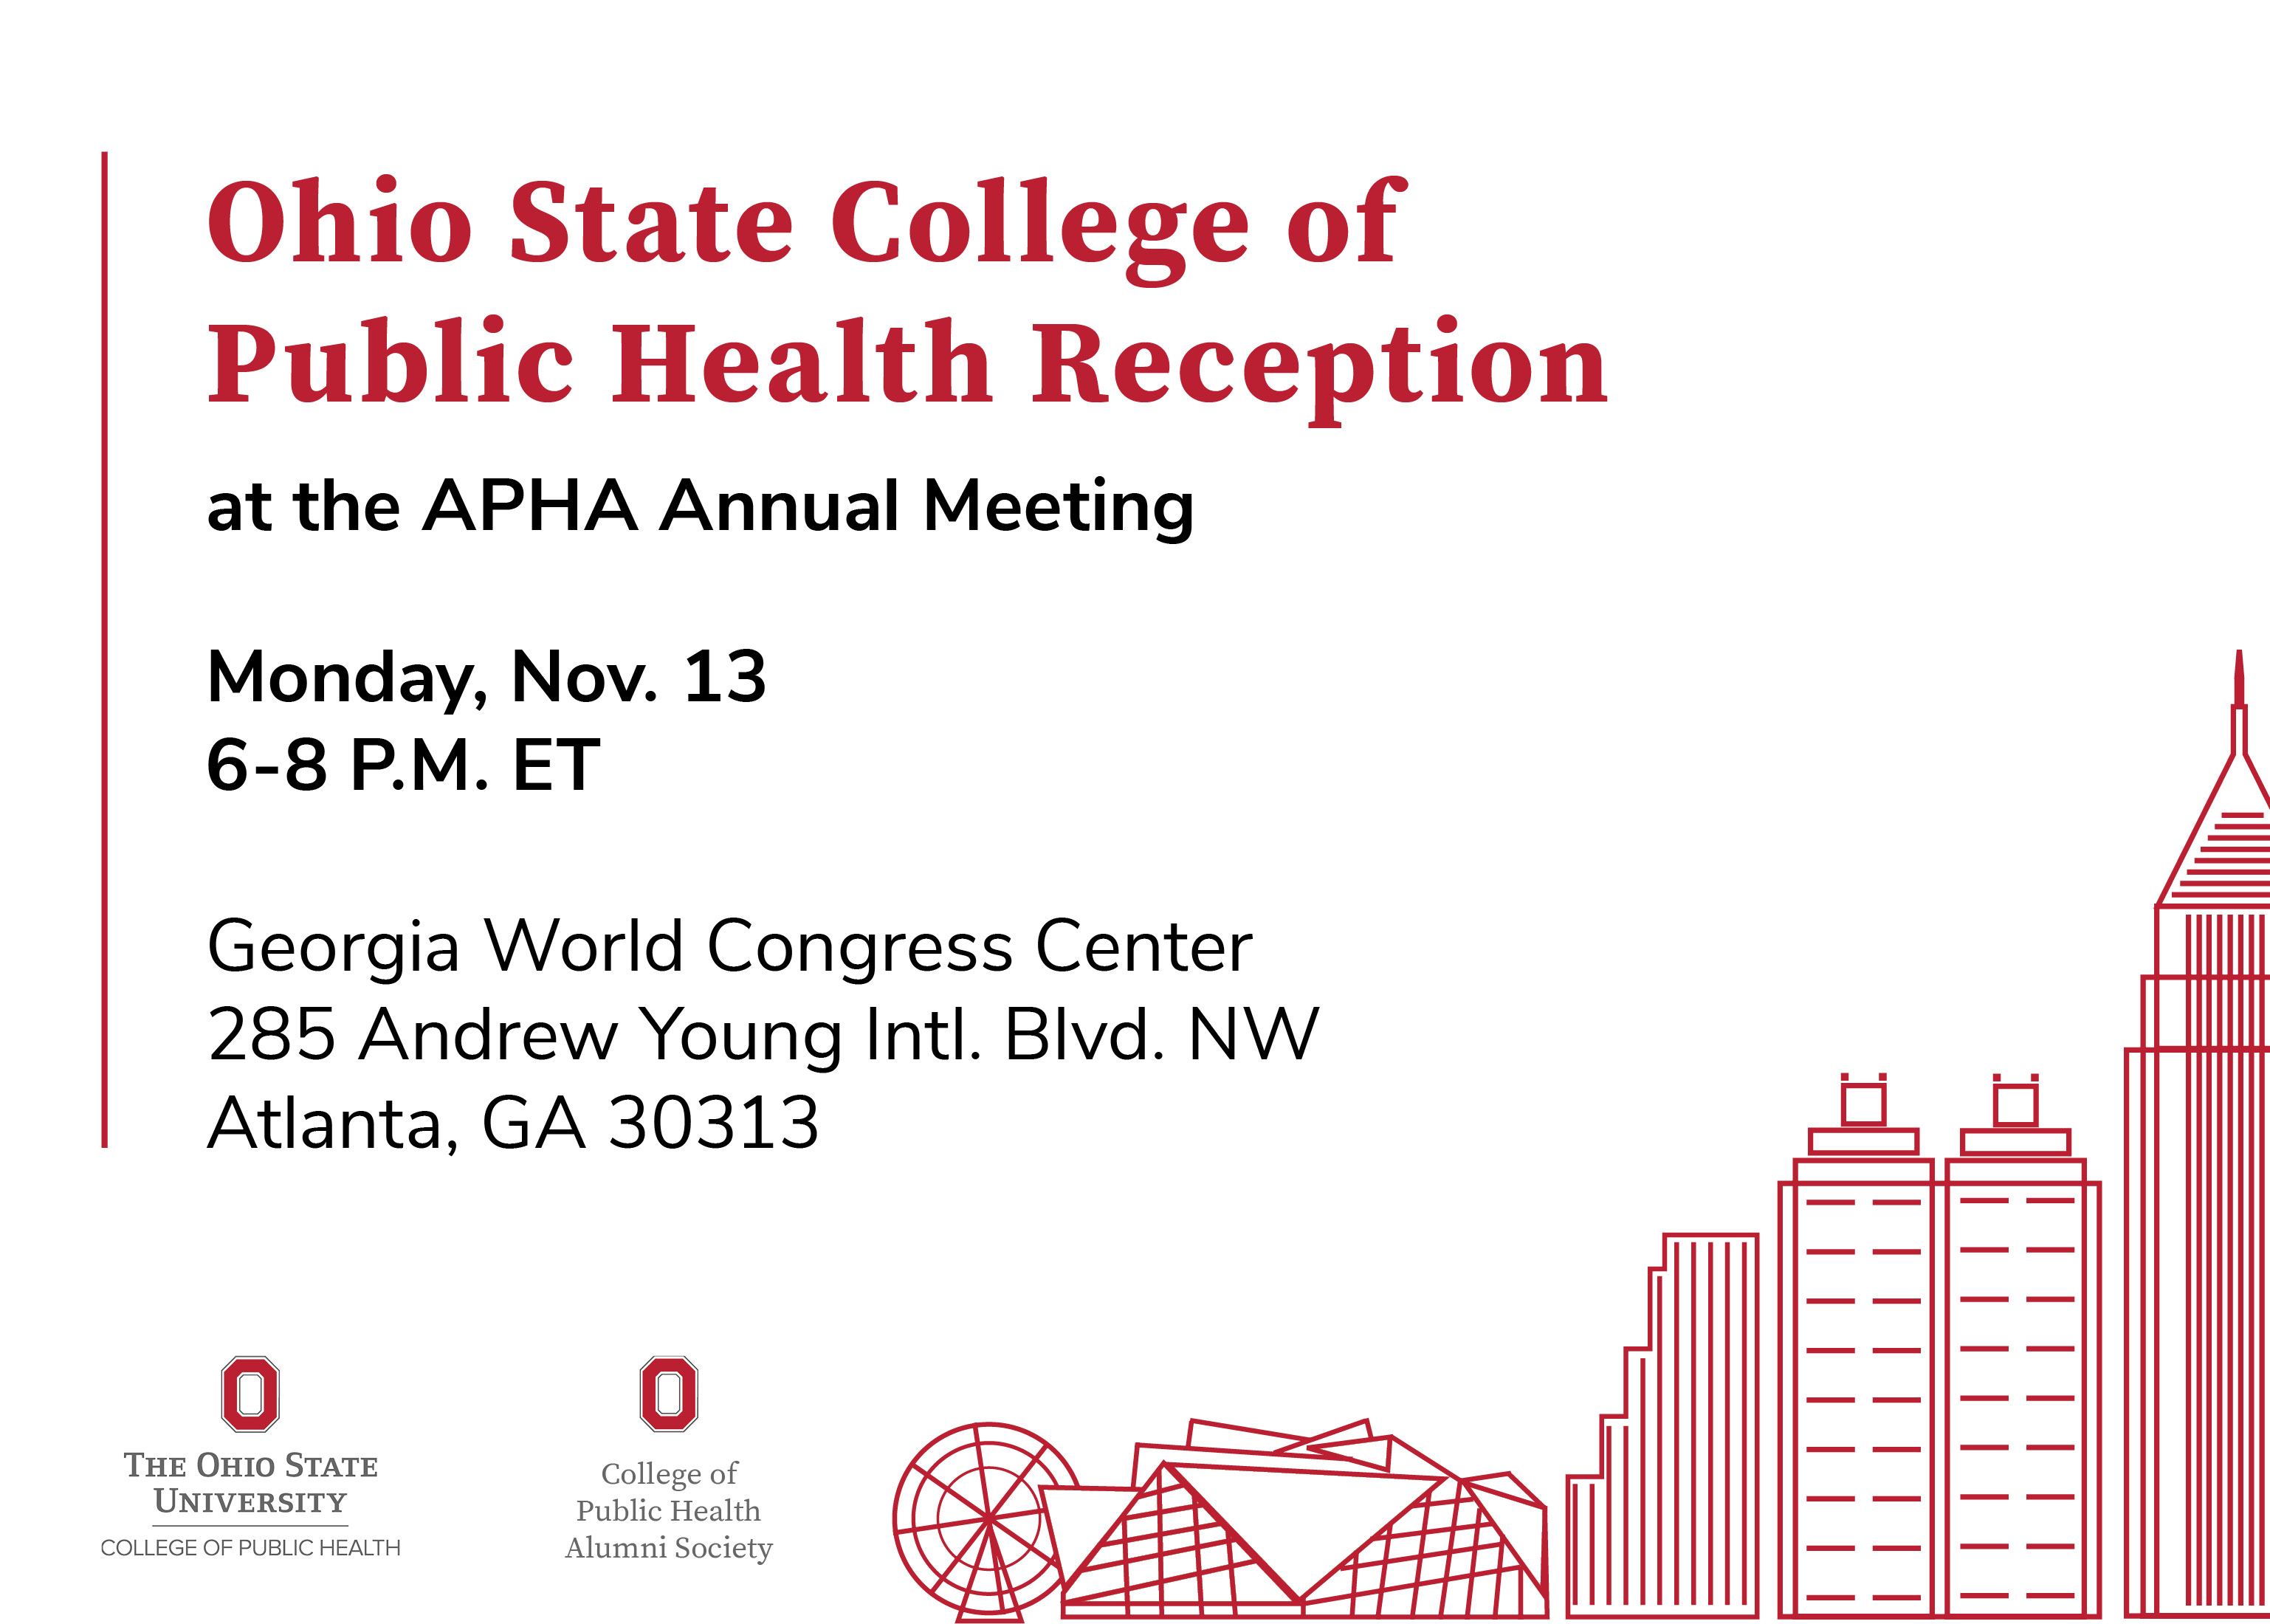 Ohio State College of Public Health Reception at the APHA Annual Meeting, Nov. 13